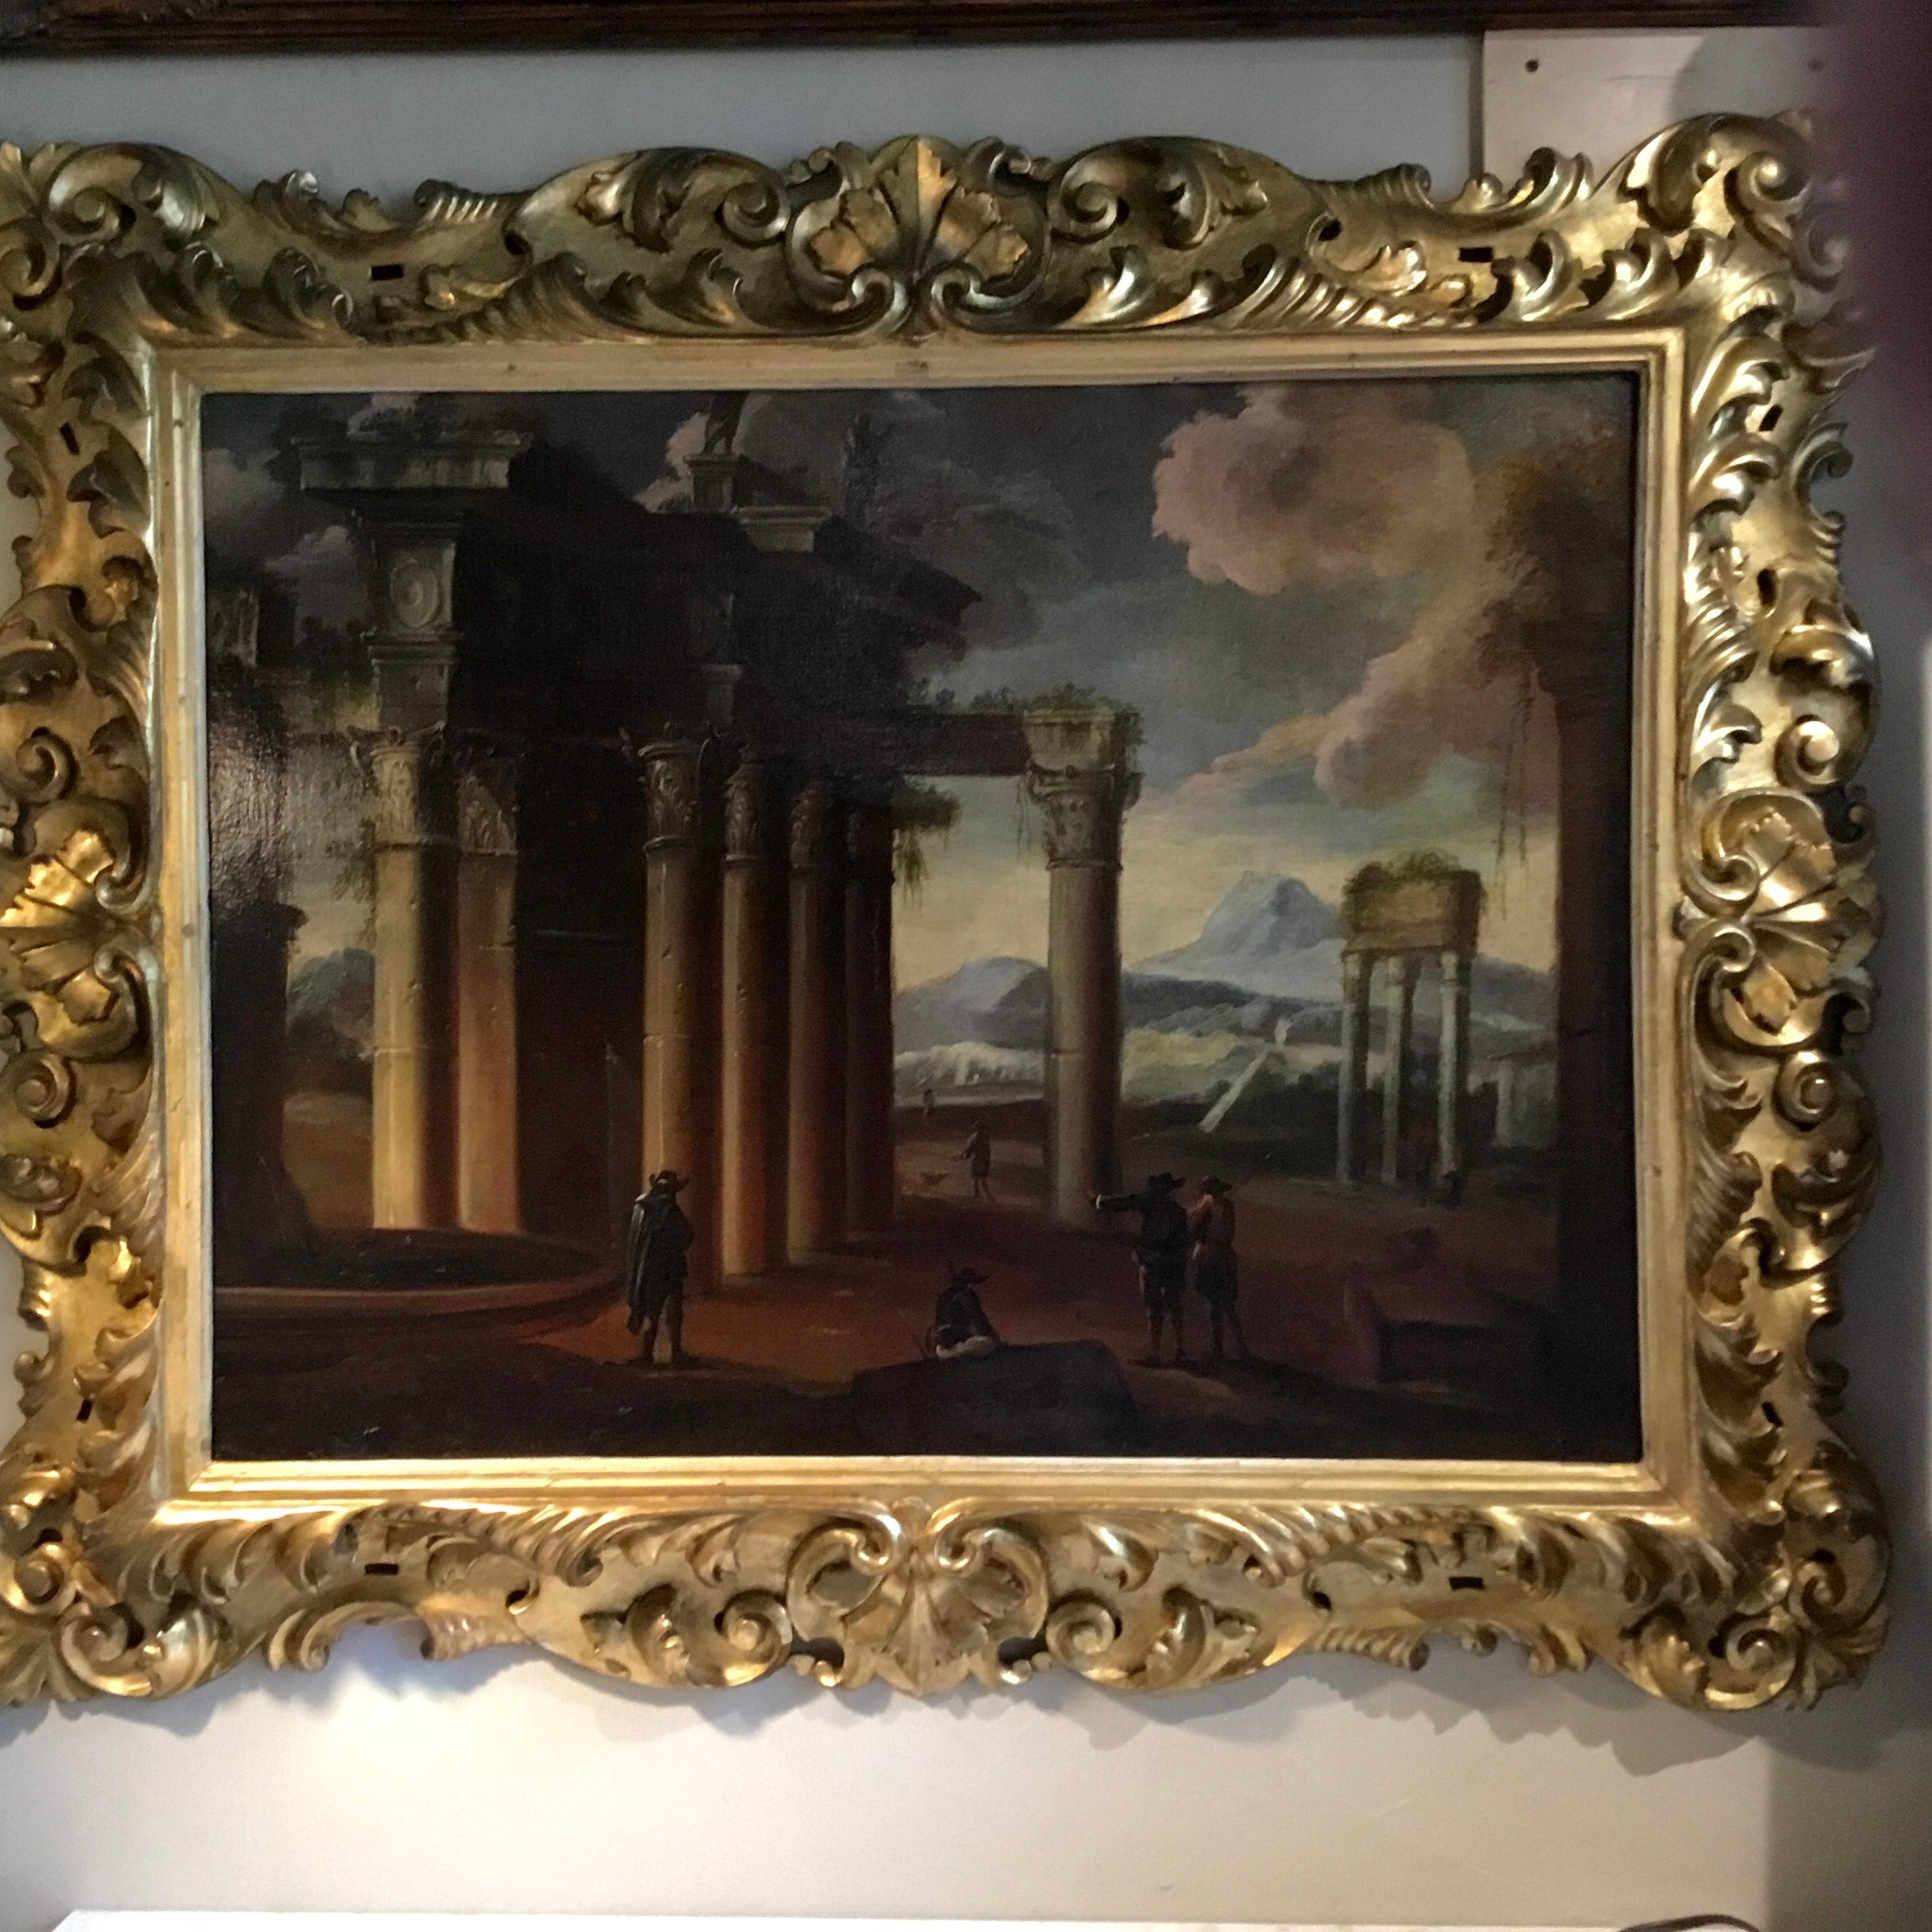 Antique old world setting depicting cavaliers in the foreground with Roman columns.
The background with a body of water and a mountain range in the back. Statues are
above the columns. Unsigned. A beautiful giltwood carved frame makes this special.